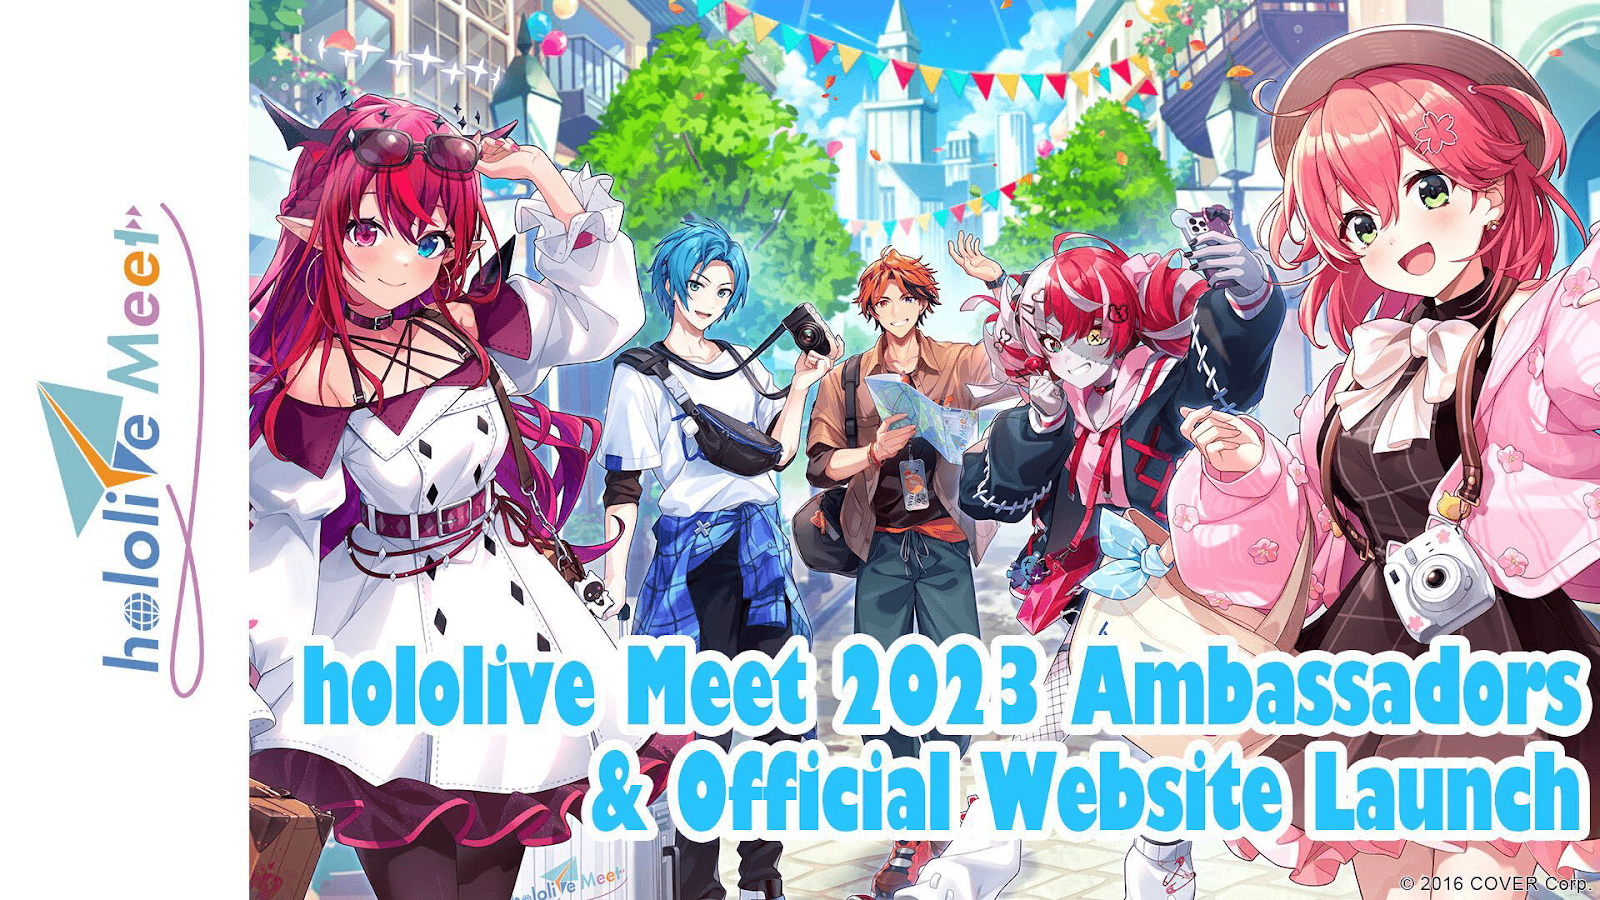 COVER Corp Hololive Meet